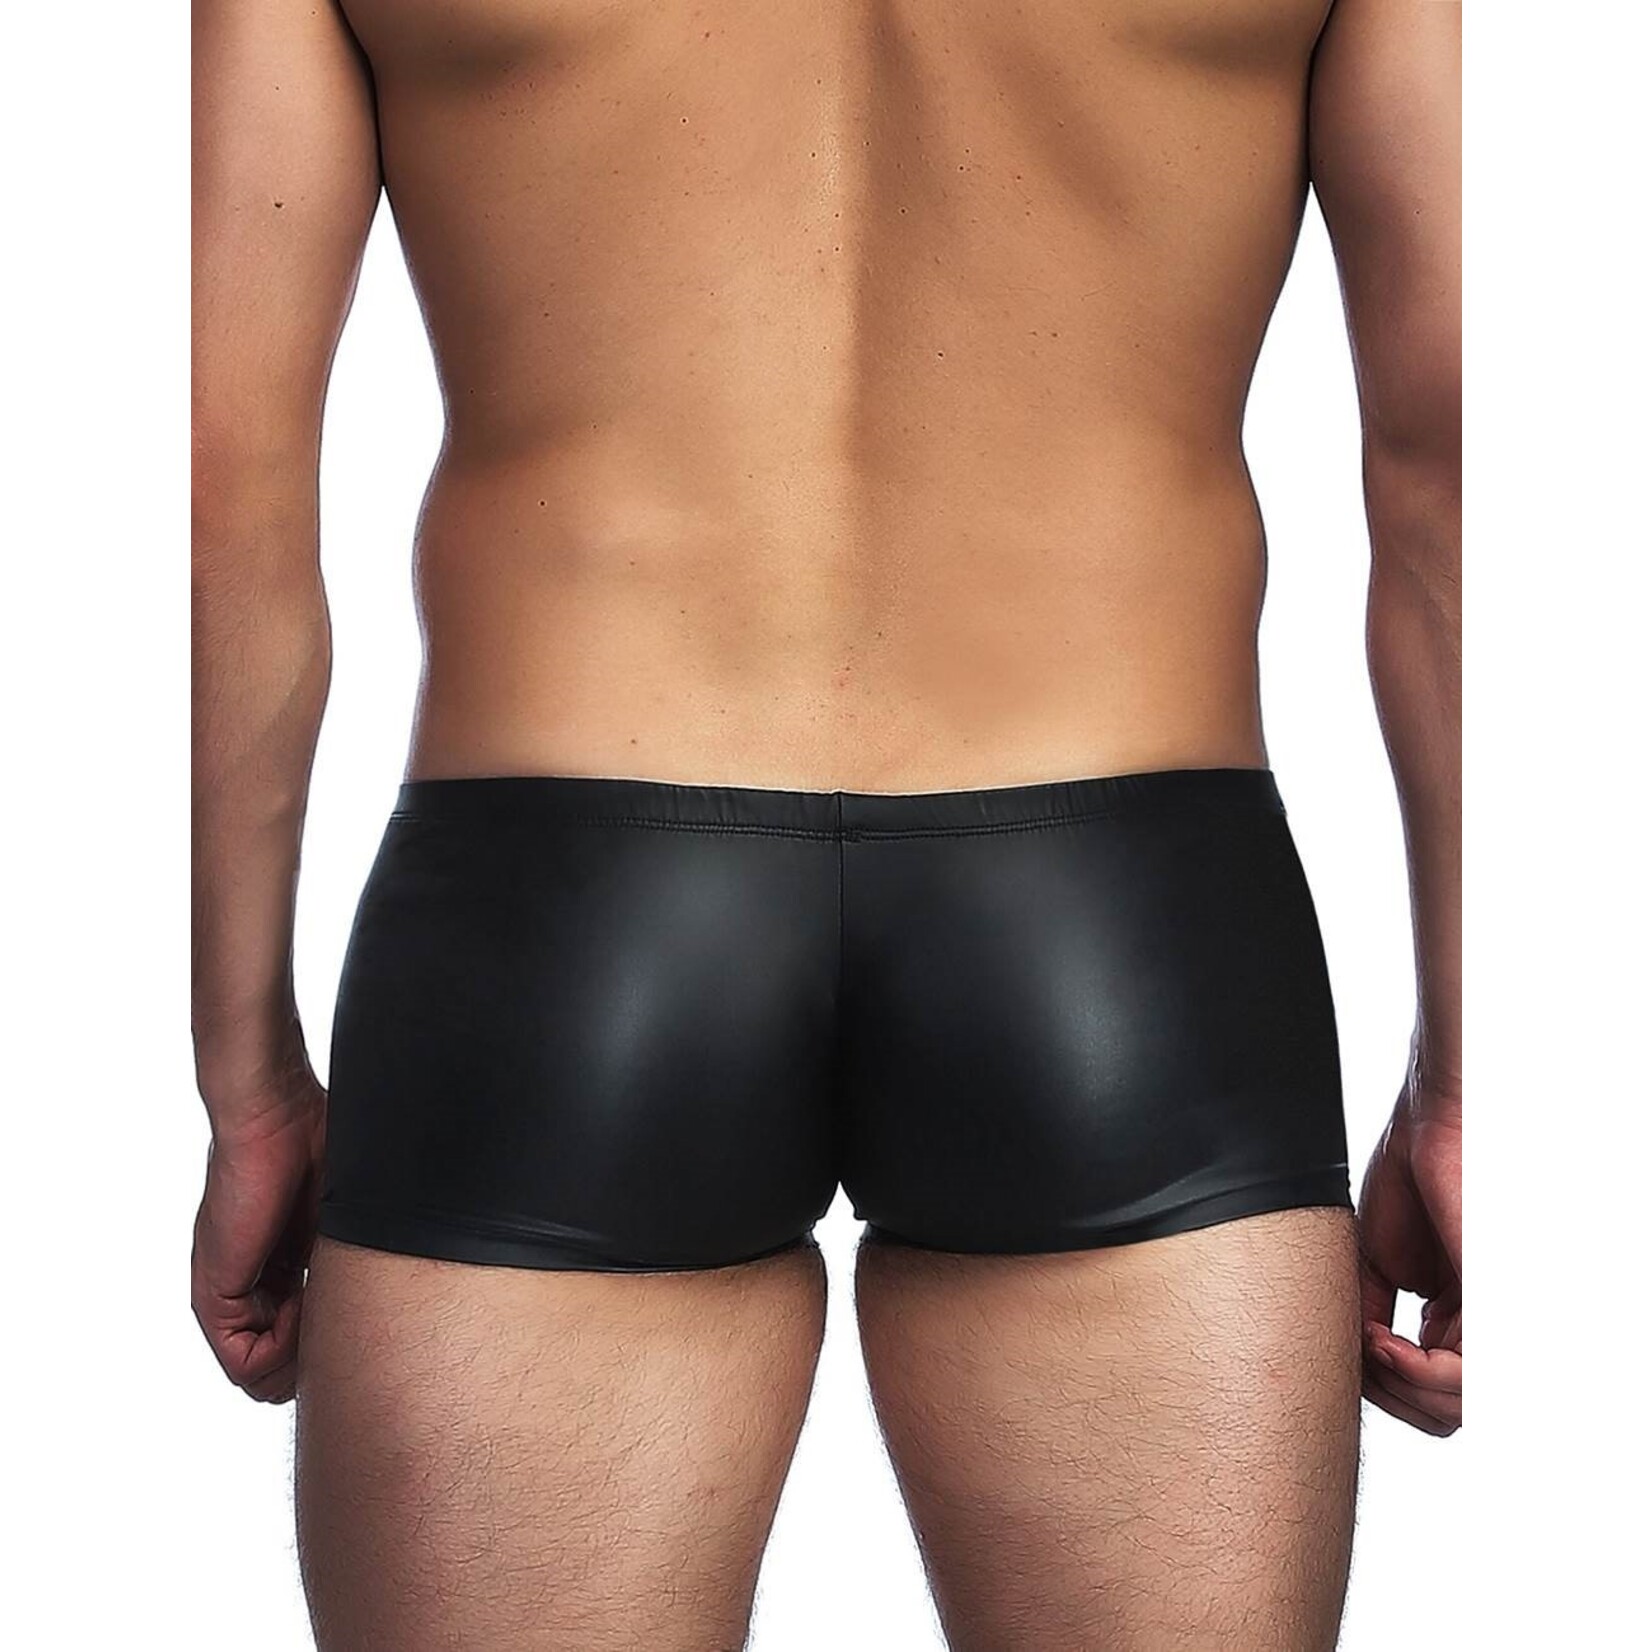 OH YEAH! -  BLACK LEATHER SEXY PANTY FOR MAN 3XL